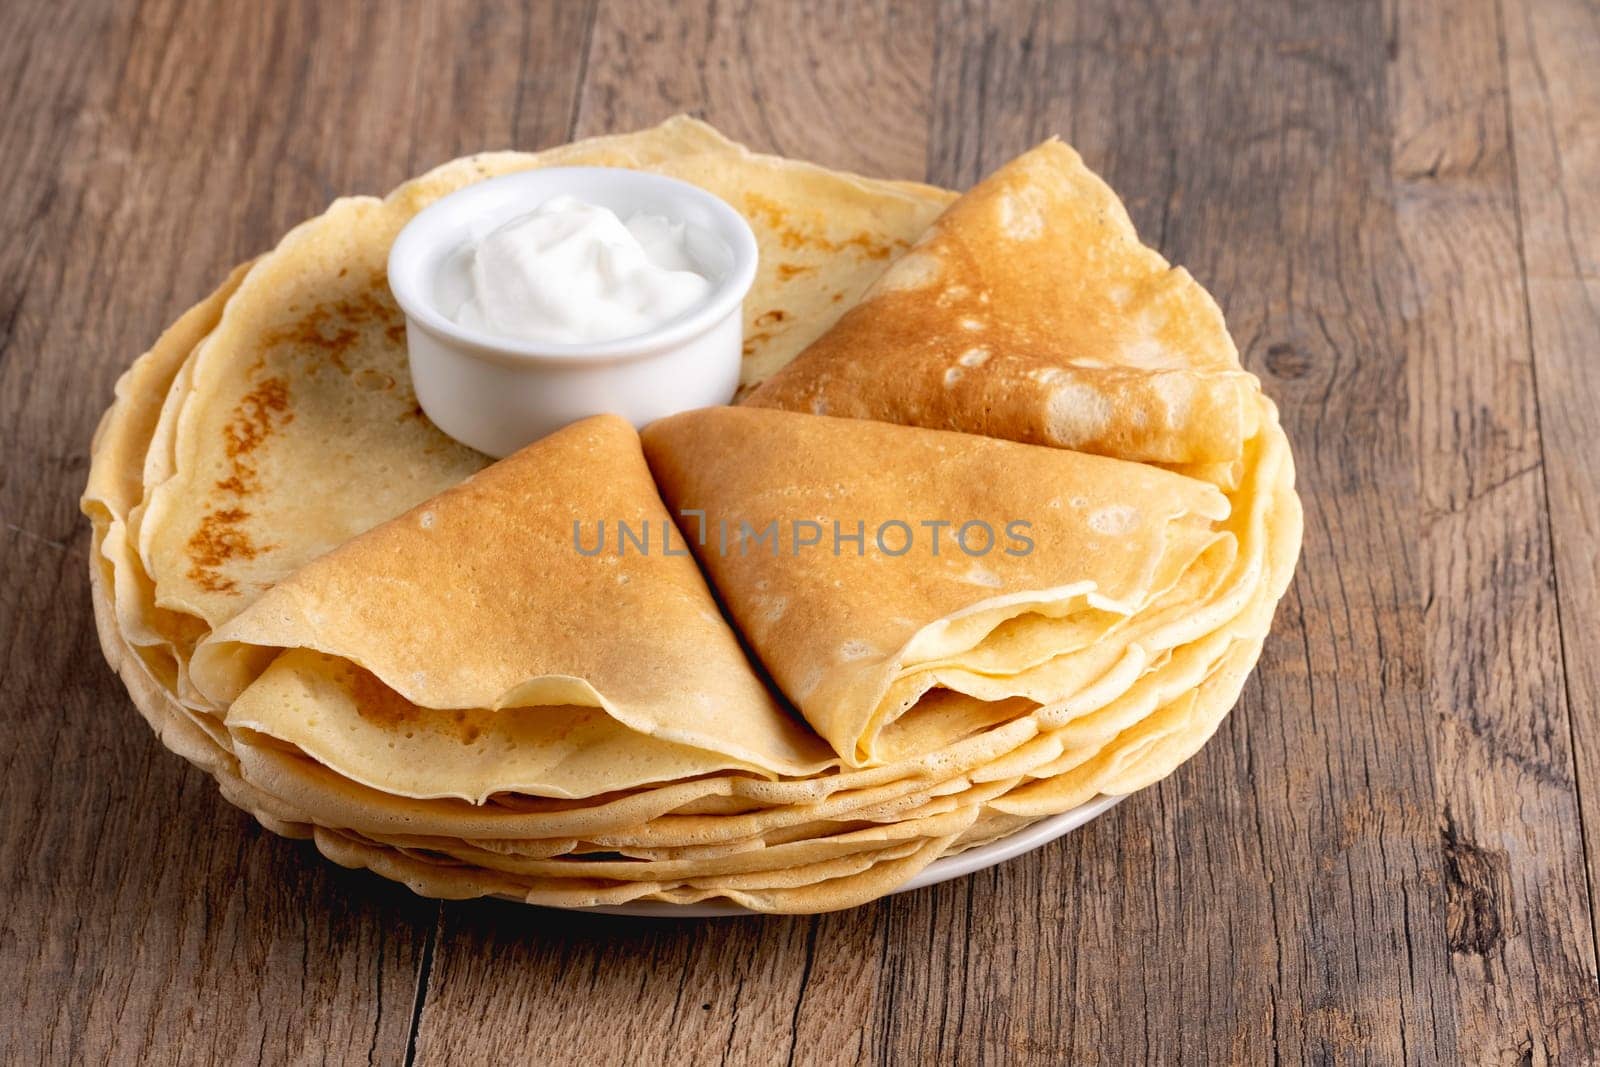 Pancakes with sour cream on a wooden table.